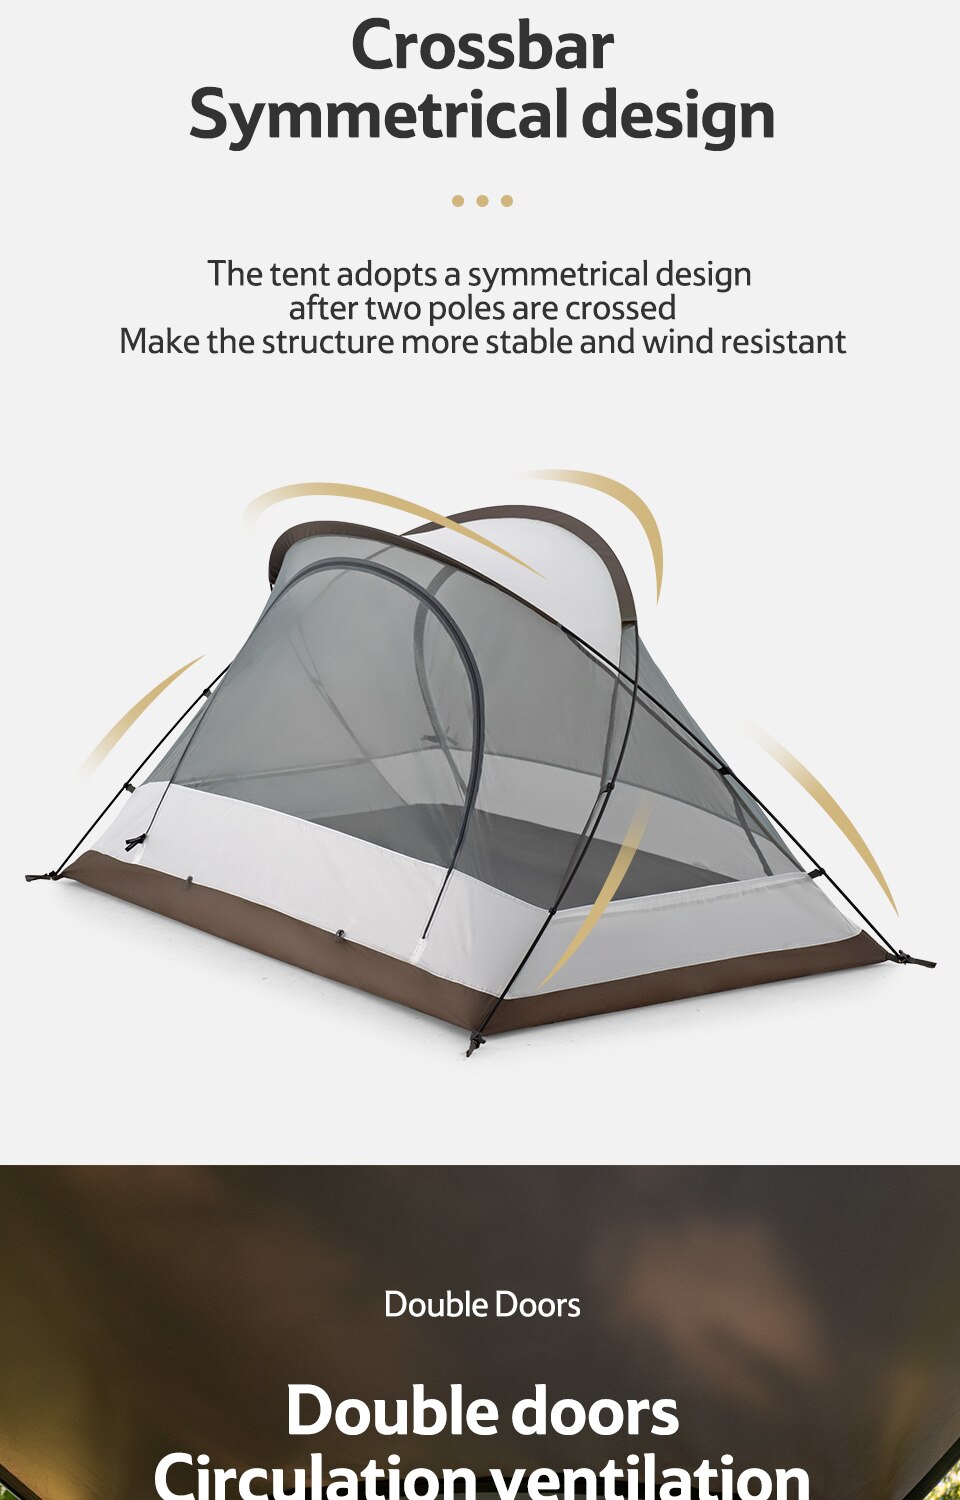 Cheap Goat Tents  Butterfly Cross Double Hall Double Tent Outdoor Portable Camping Travel Rainproof Windproof Sunscreen Breathable Tent   